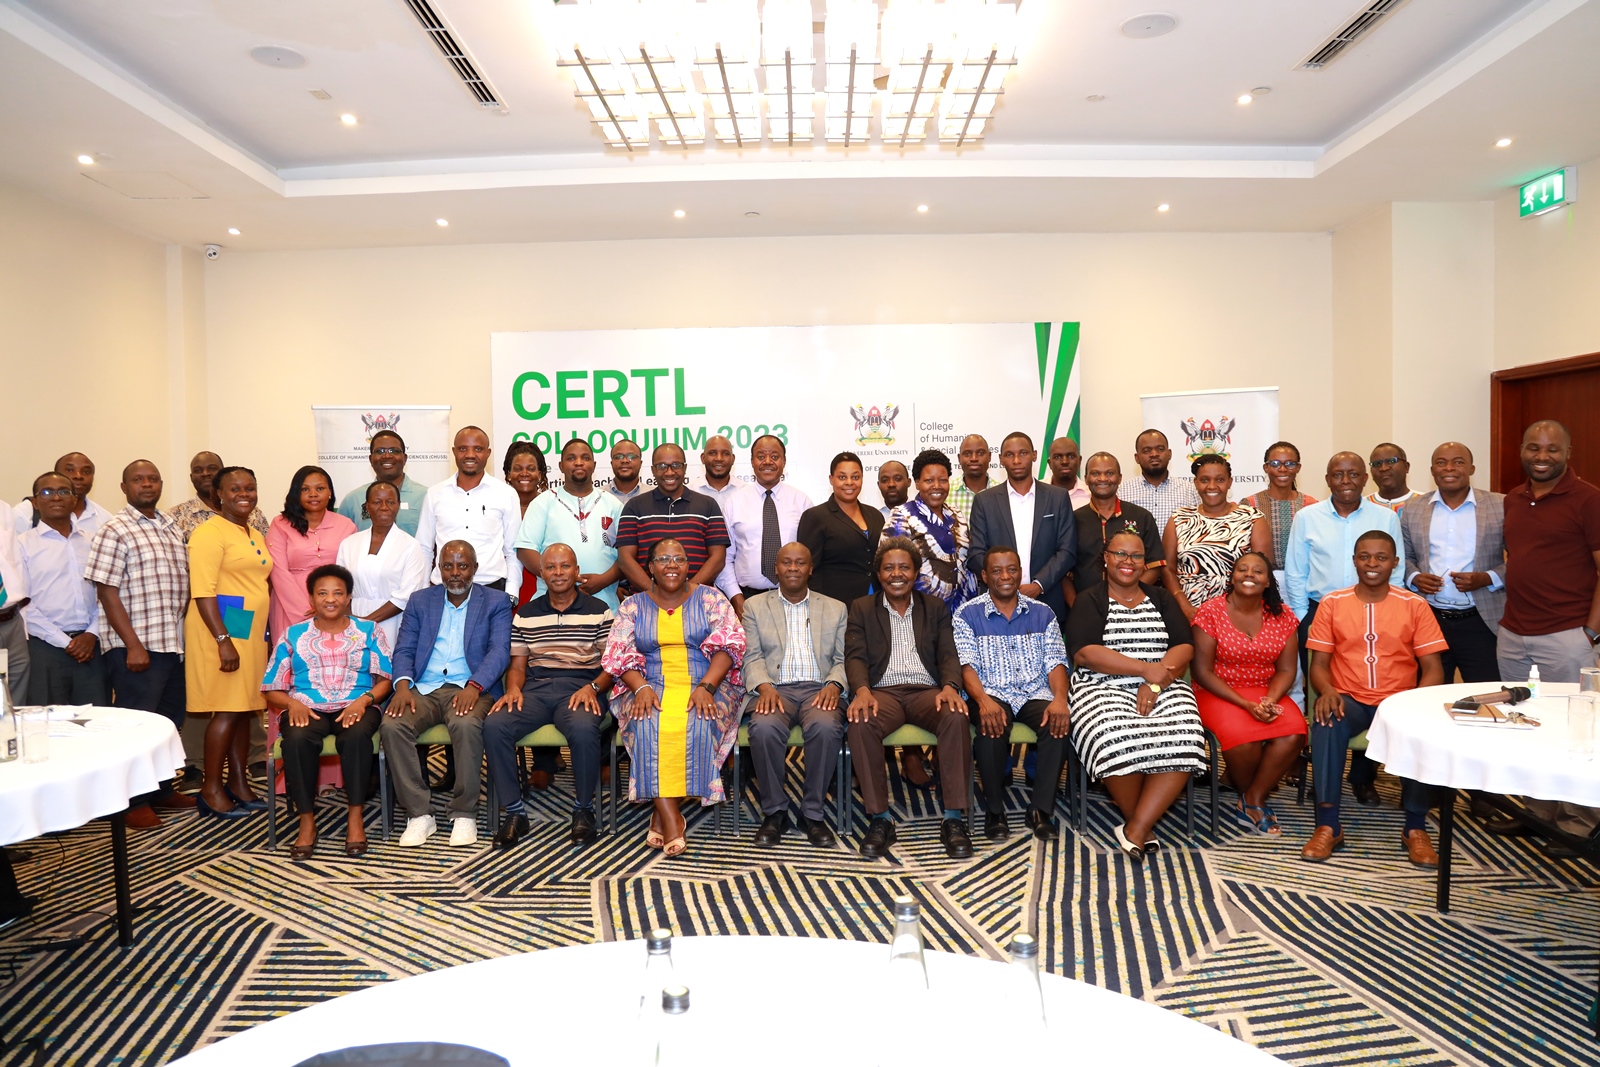 The Principal CHUSS, Assoc. Prof. Josephine Ahikire (Seated 4th Left) with CERTL Leadership and participants at the colloquium held from 18th to 19th May 2023, Hilton Garden Inn, Kampala, Uganda.